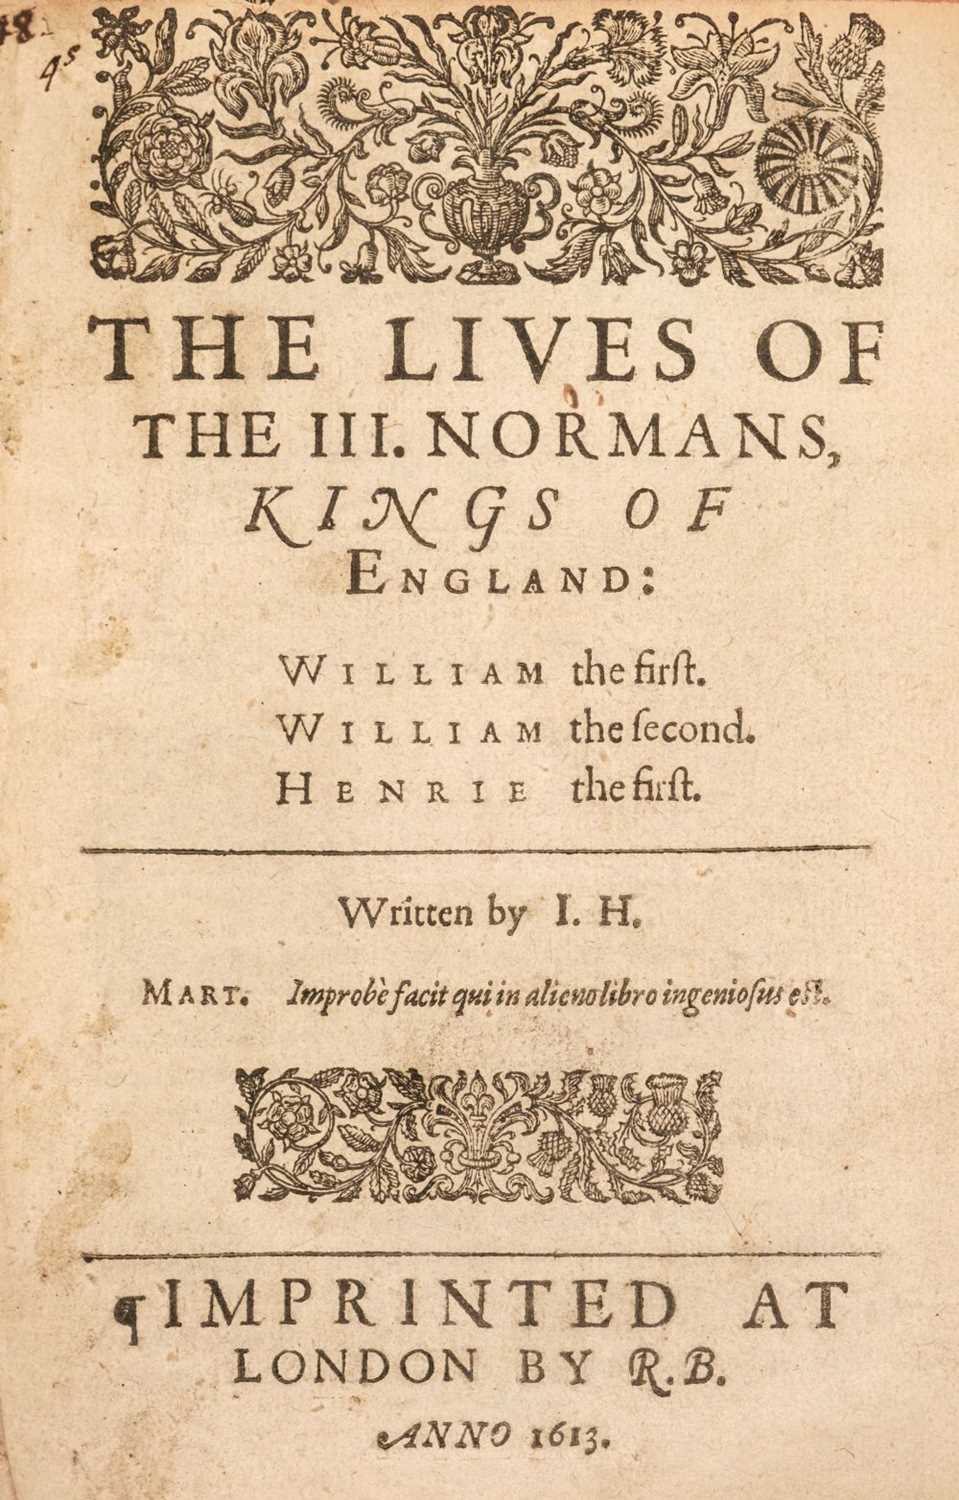 Lot 266 - Hayward (John). The Lives of the III. Normans, Kings of England, 1613